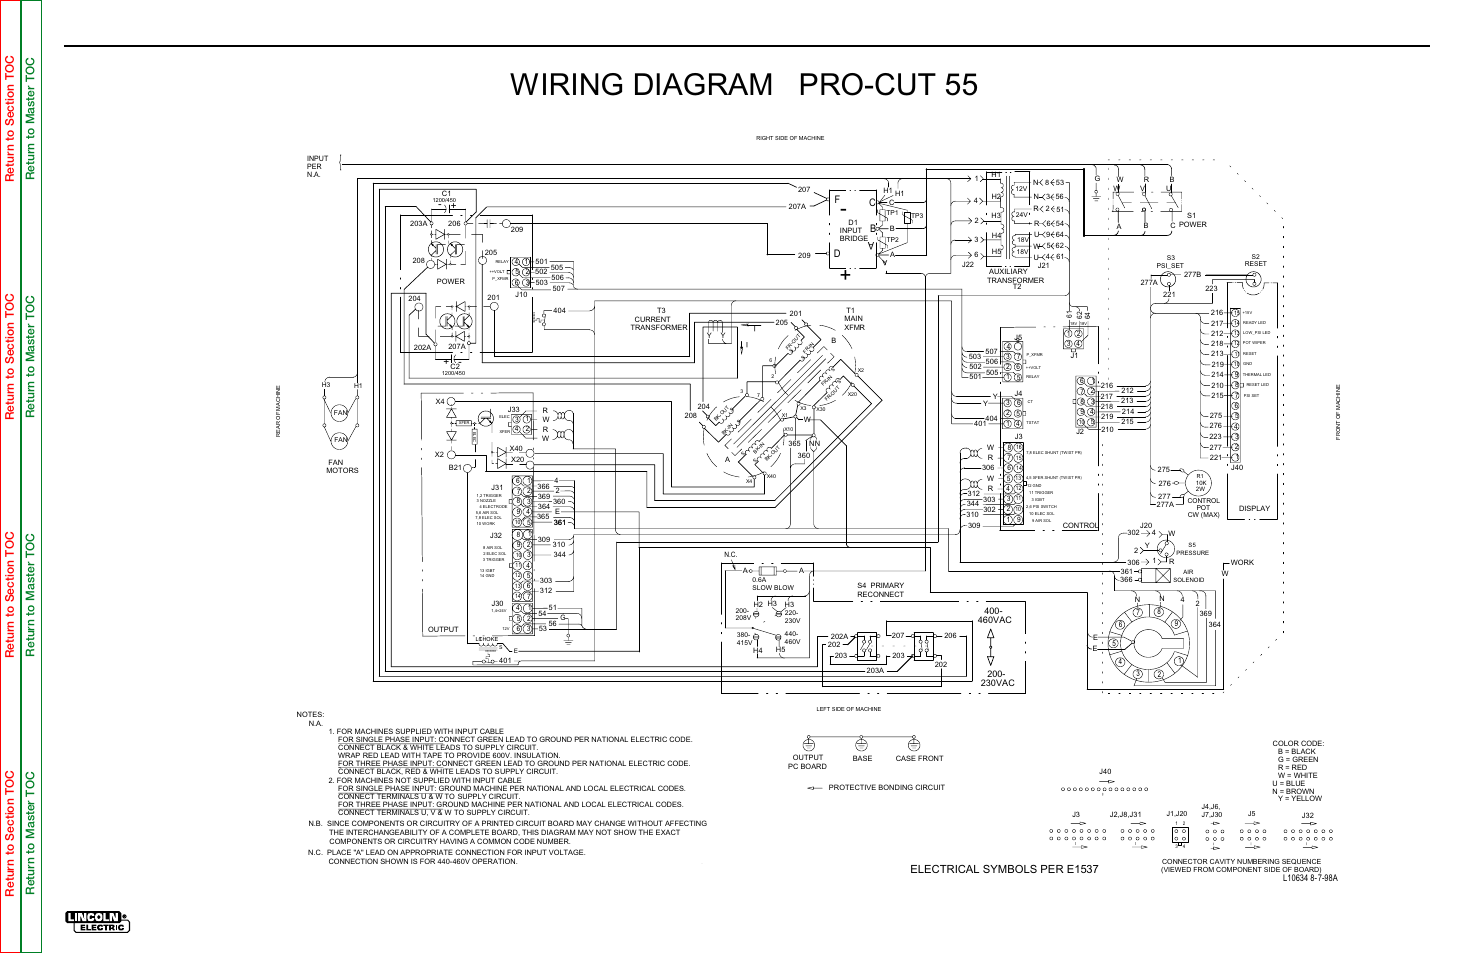 Wiring diagram pro-cut 55, Electrical diagrams, Wiring diagram - entire machine | Procut 55, Electrical symbols per e1537, Ab c d f | Lincoln Electric PRO-CUT 55 SVM140-A User Manual | Page 109 / 121